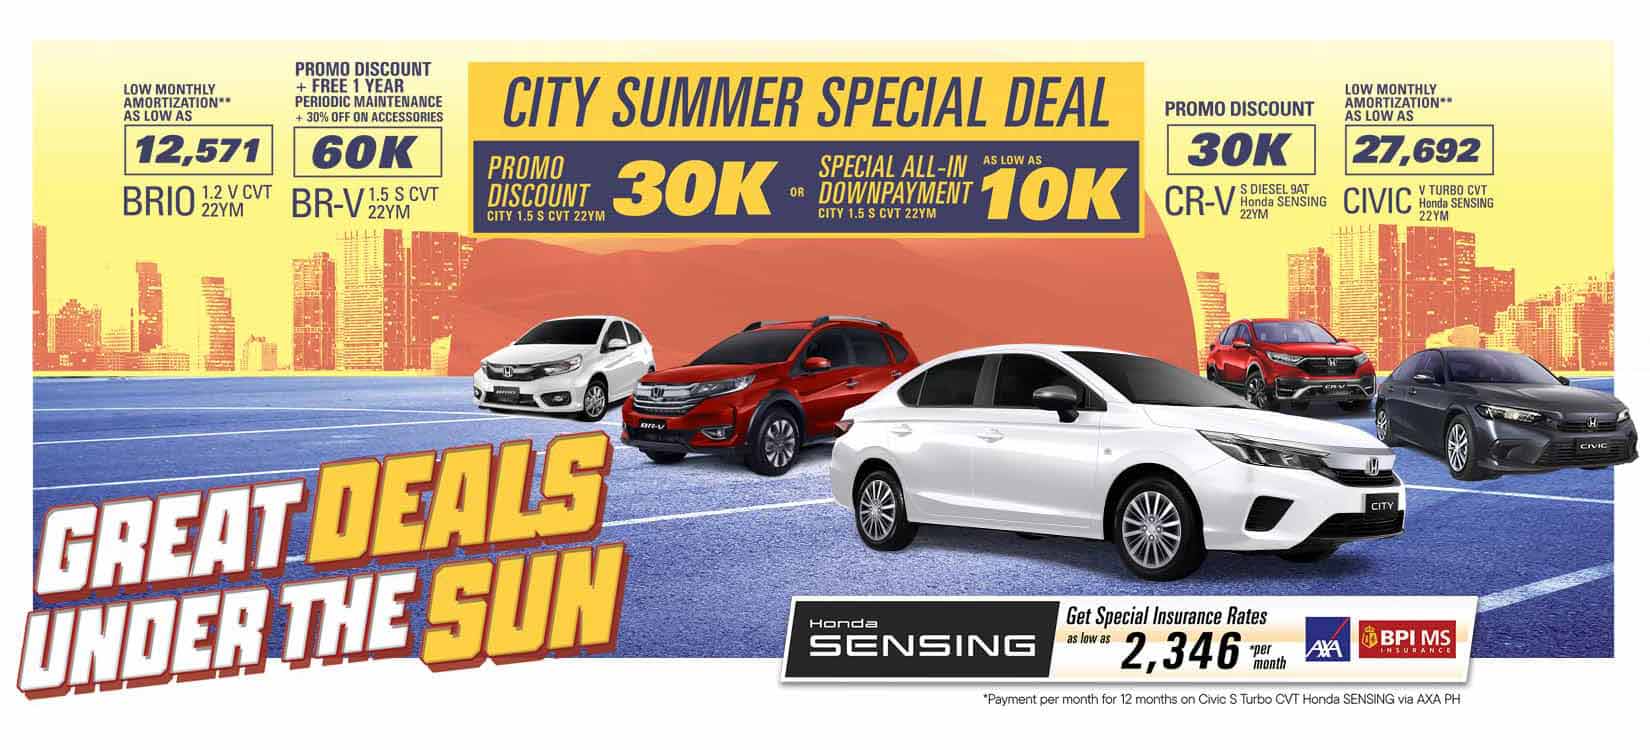 Get exclusive treats on a brand-new BR-V and enjoy extended offers from Hondaâ€™s â€œGreat Deals Under the Sunâ€